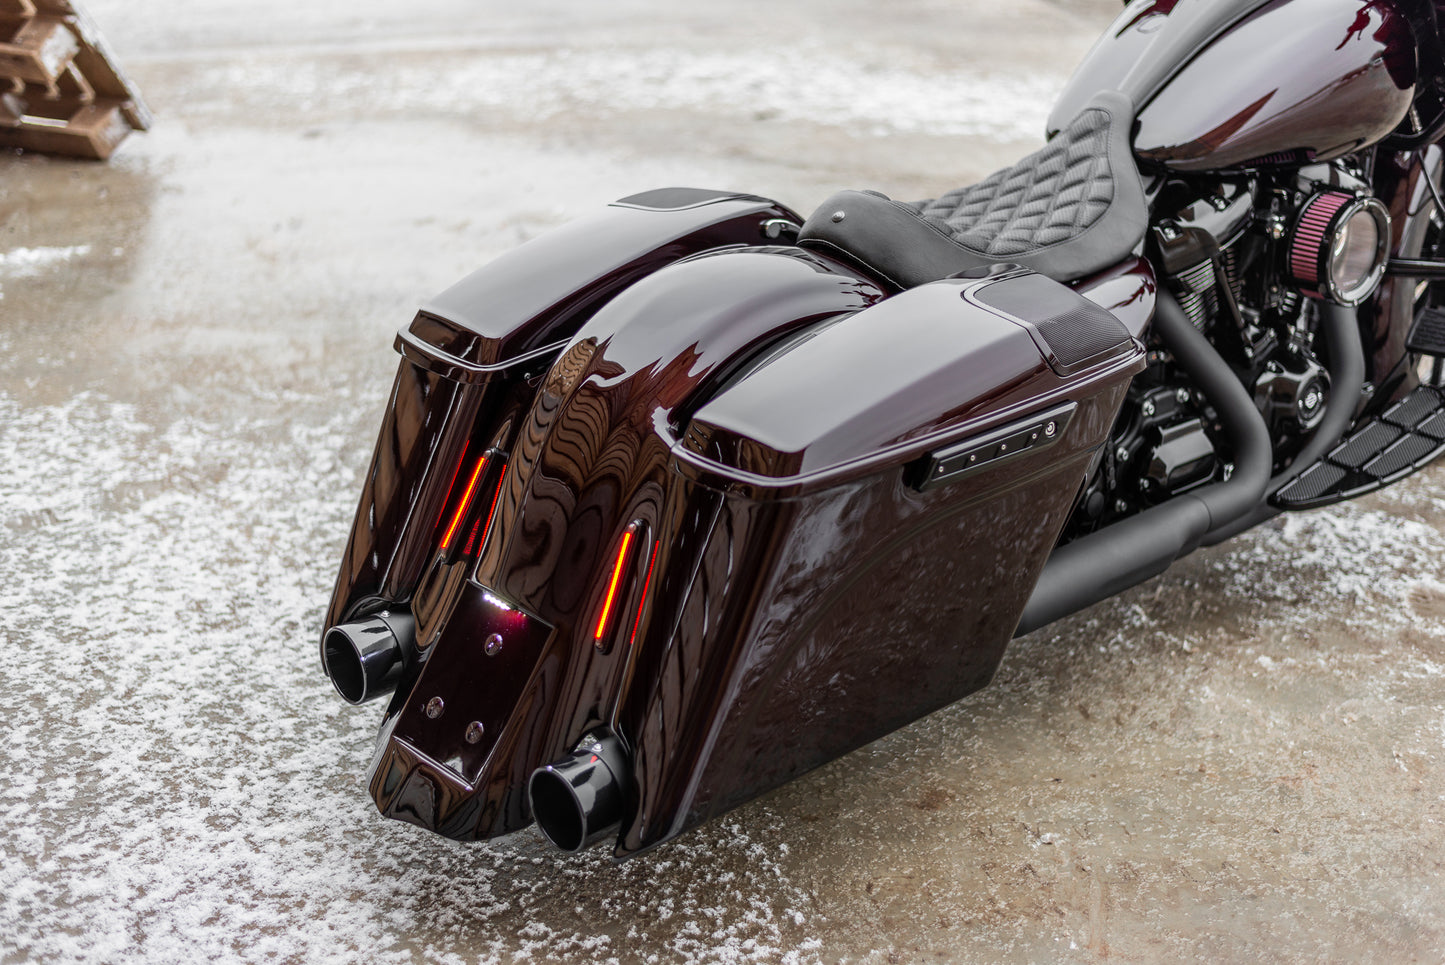 Zoomed Harley Davidson motorcycle with Killer Custom extended bagger saddlebags from the rear neutral background